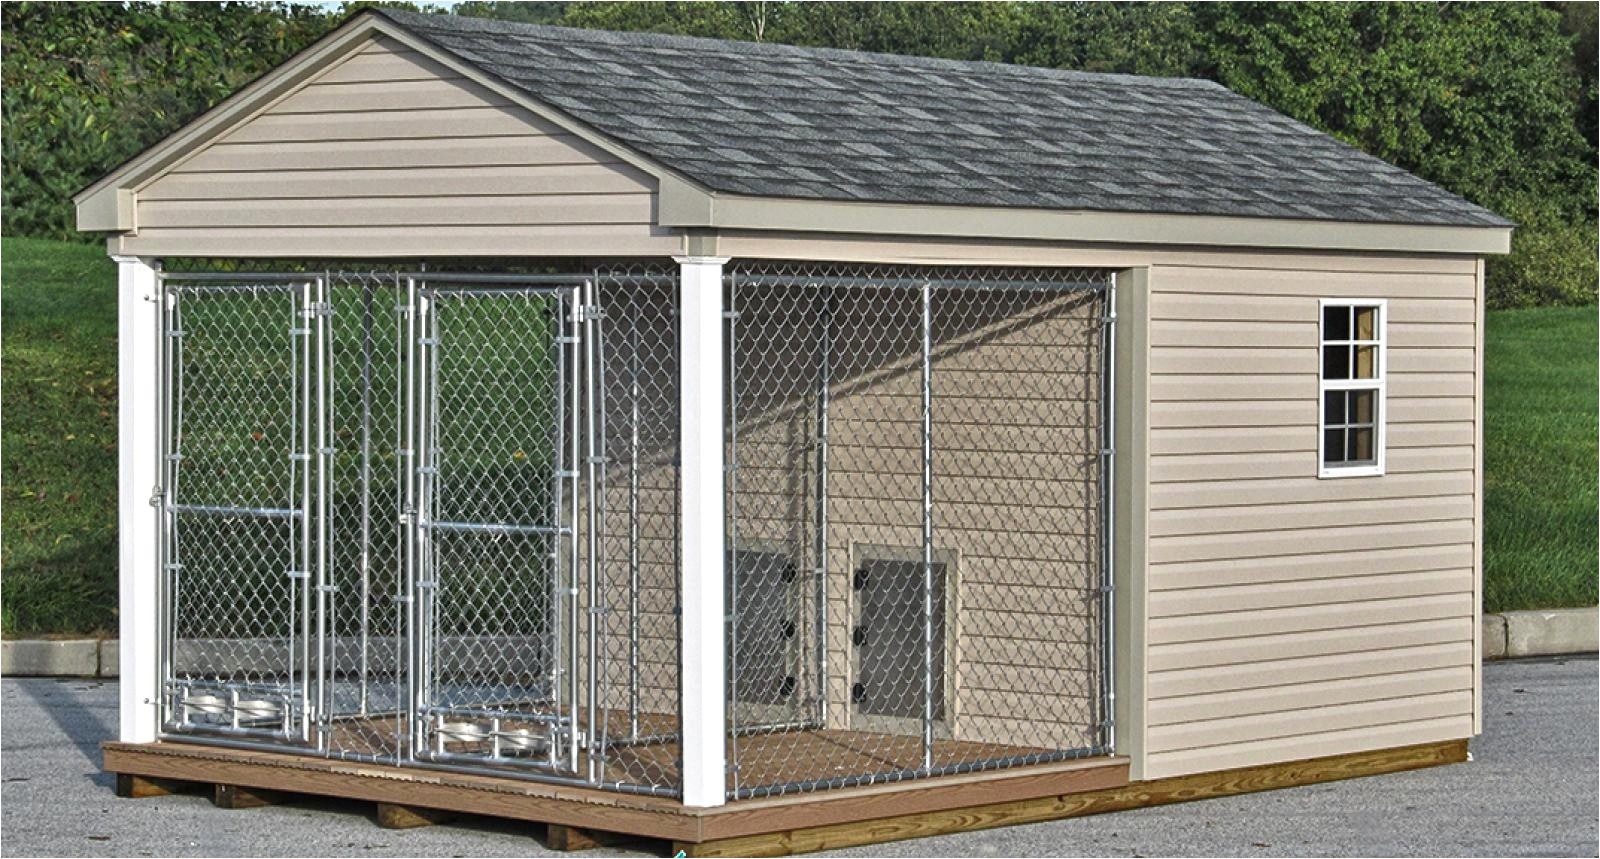 dog house plans for multiple dogs